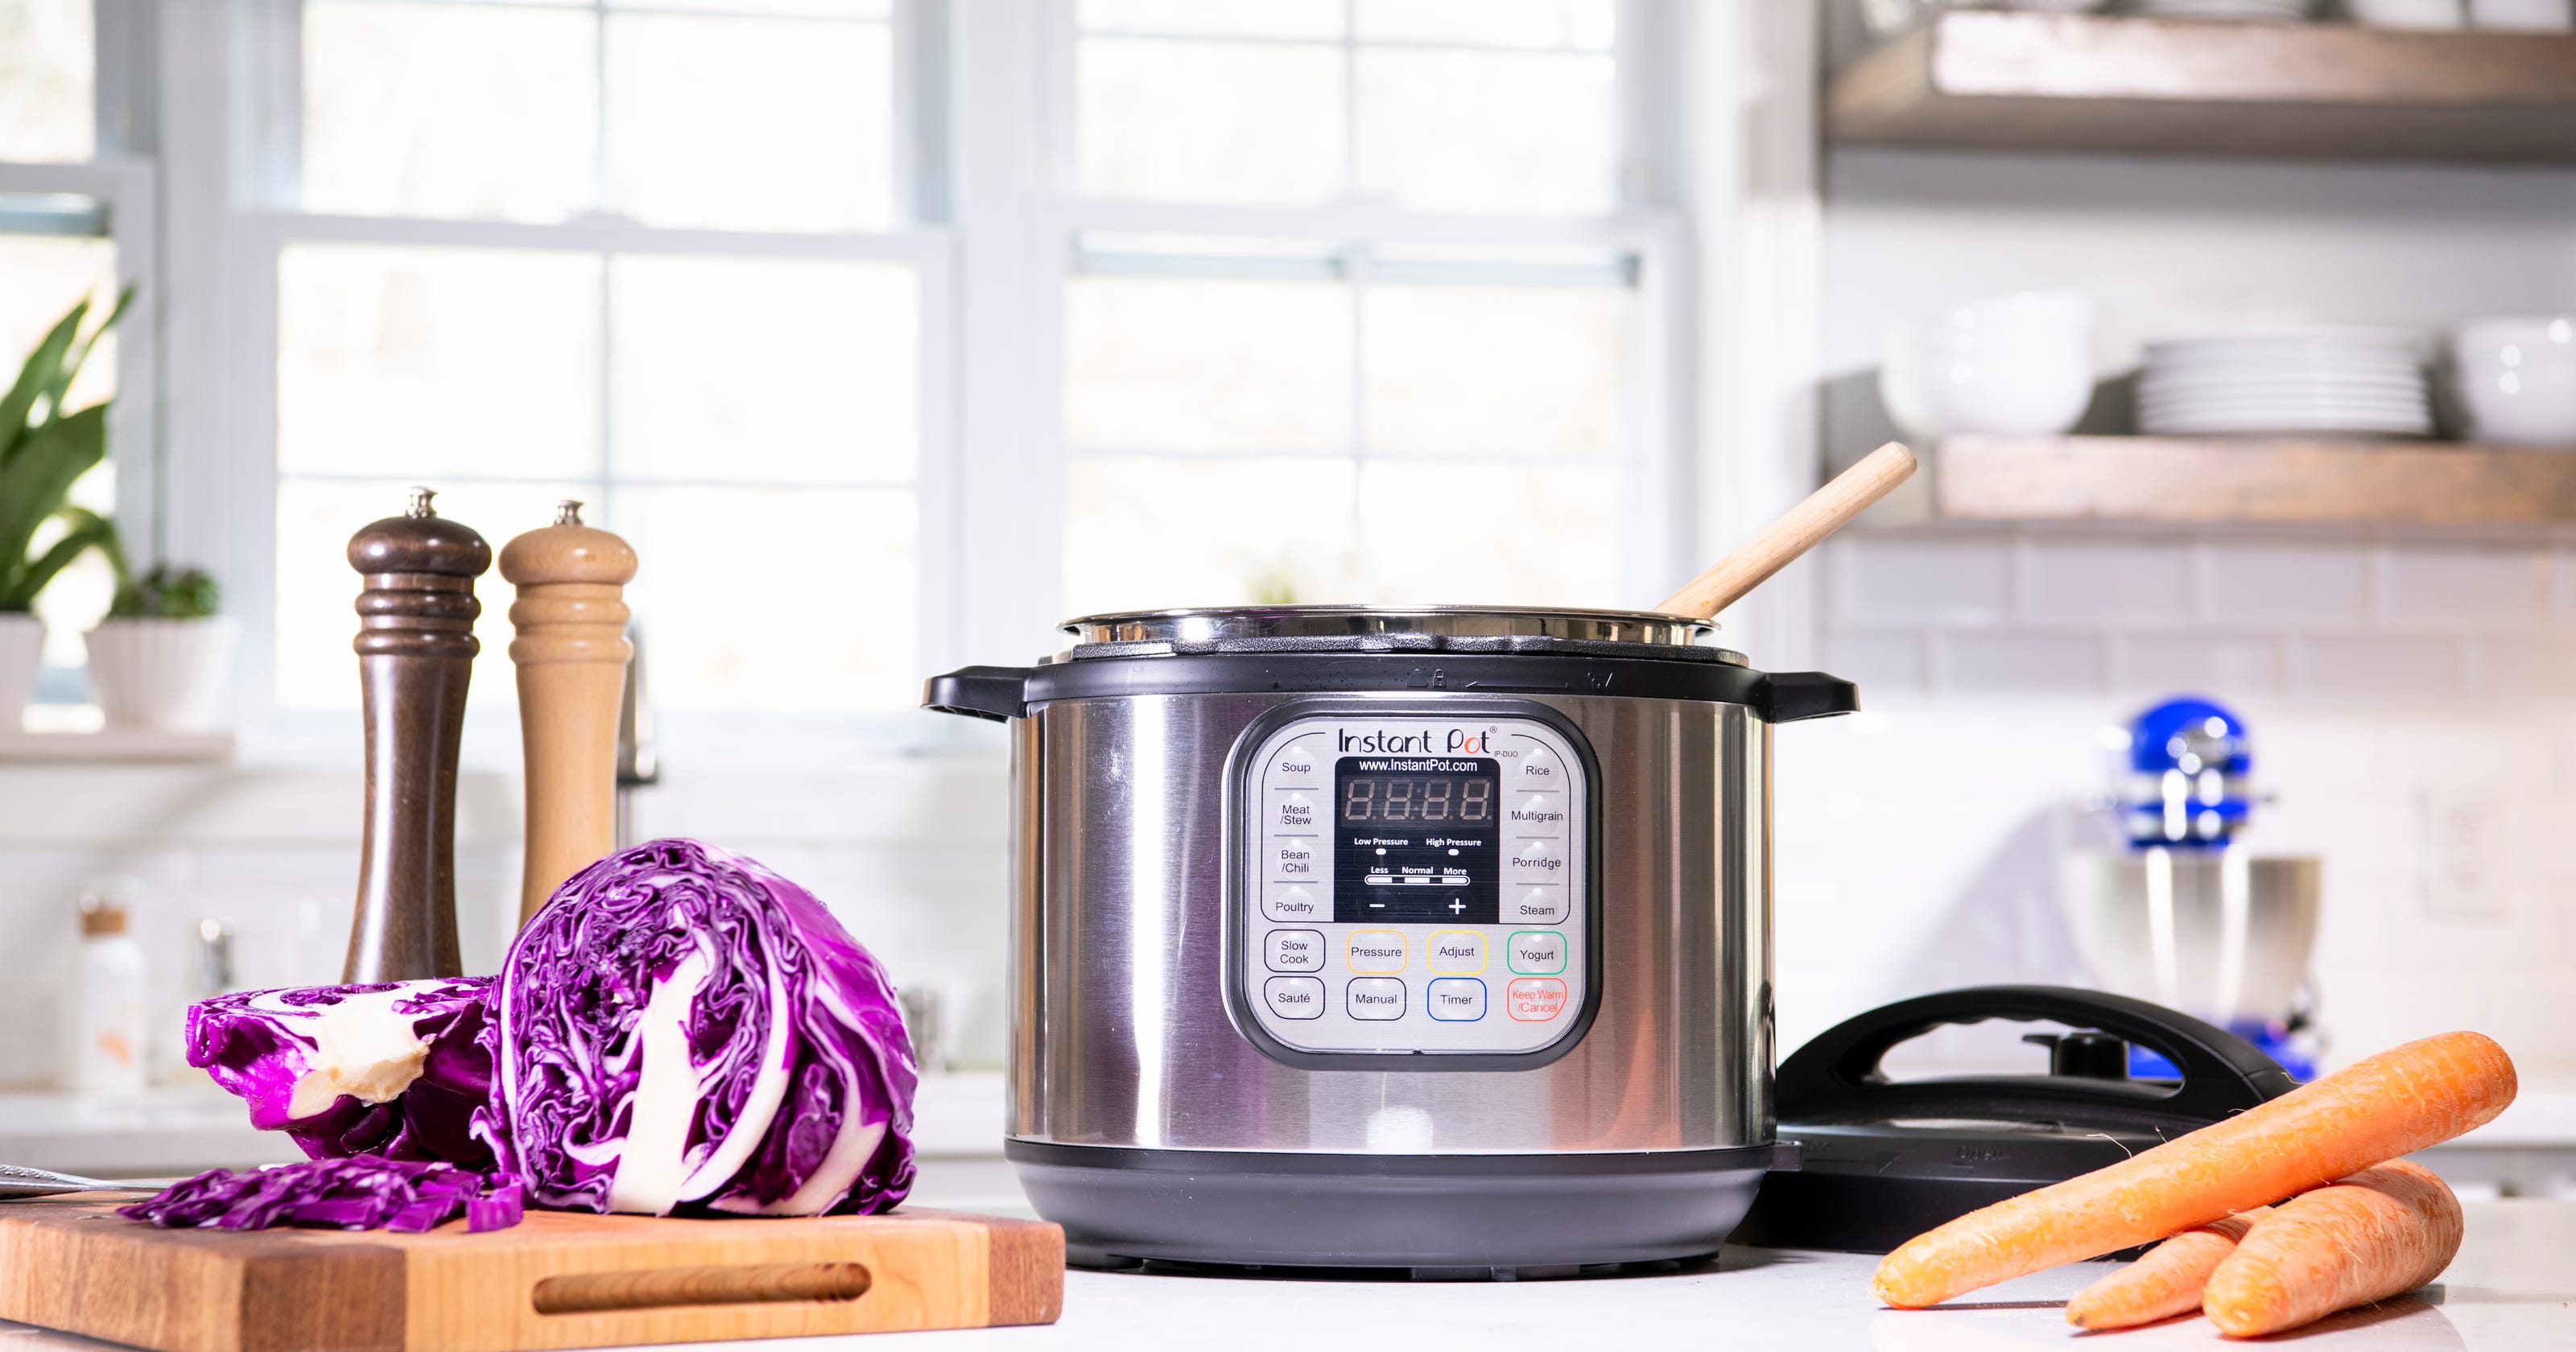 Black Friday 2018: The best Target deals on the Instant Pot, TVs, and more